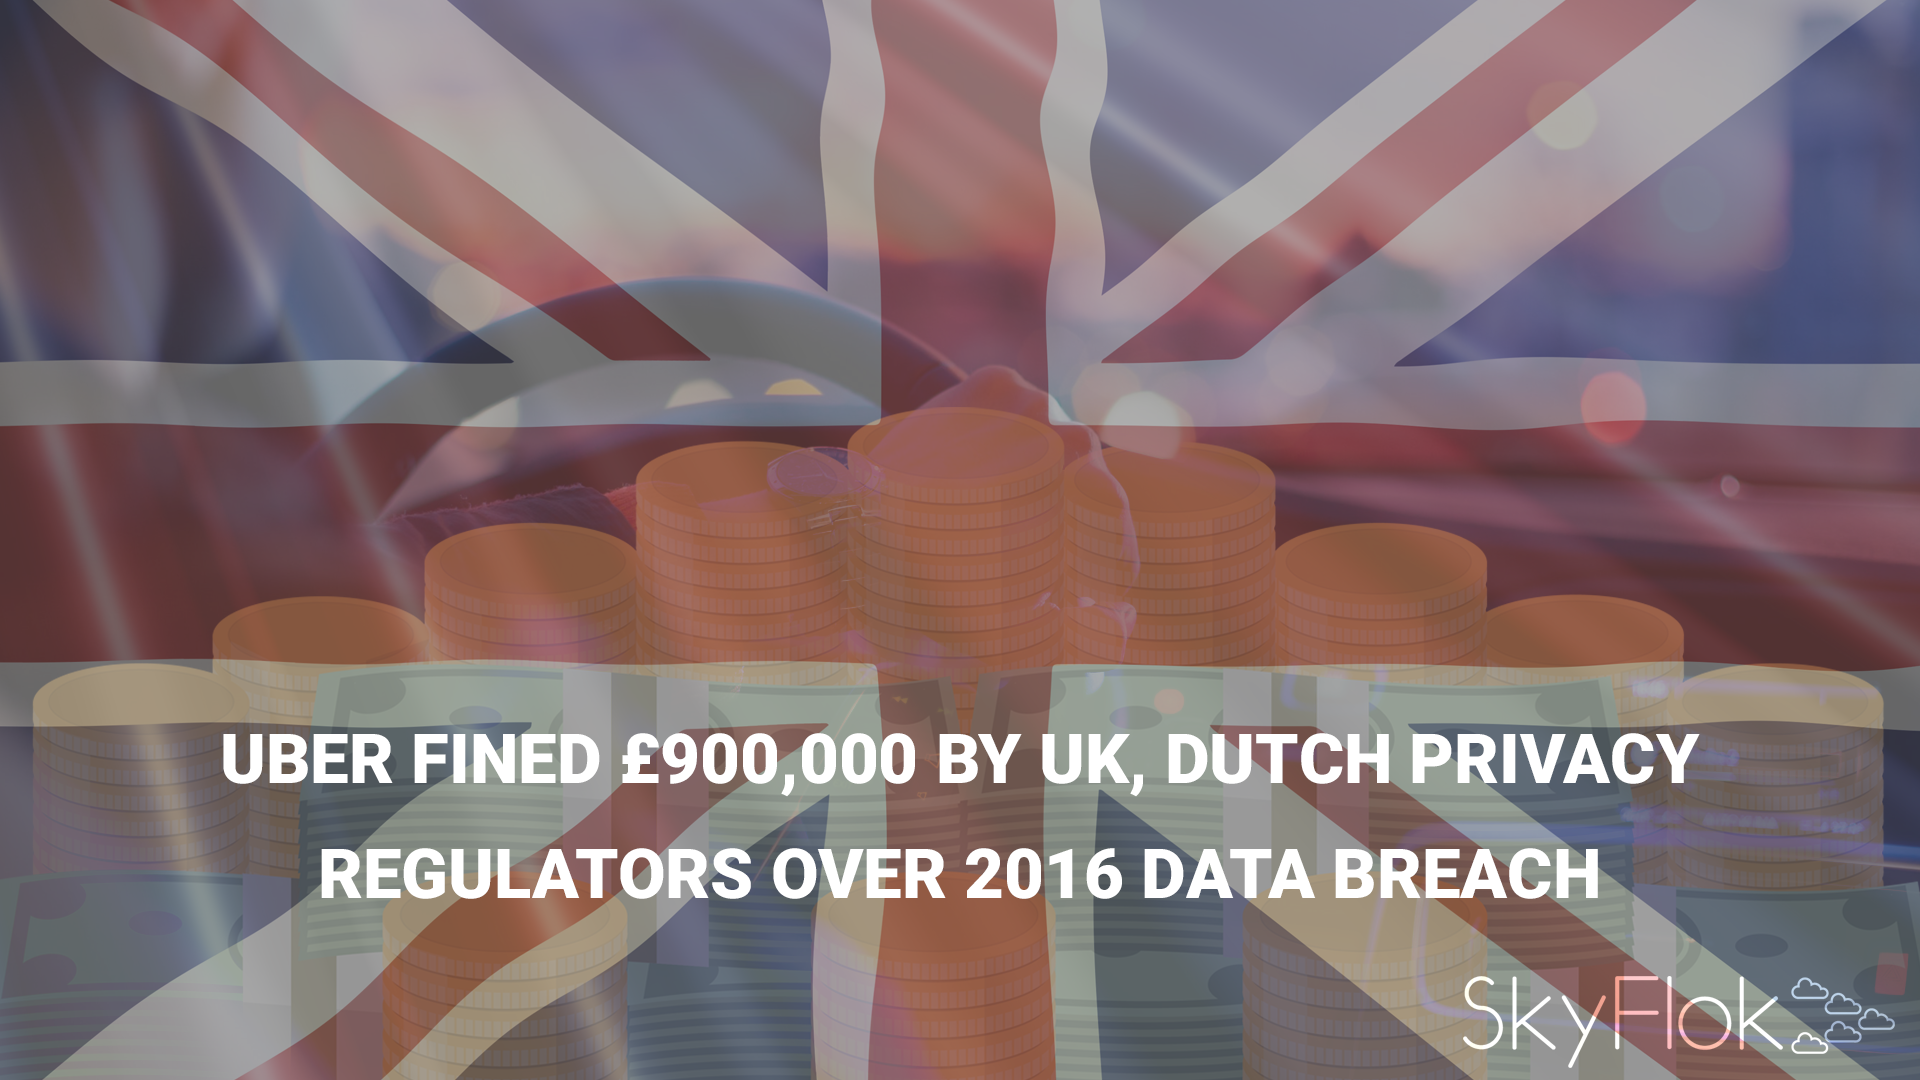 You are currently viewing Uber fined £900,000 by UK, Dutch privacy regulators over 2016 data breach